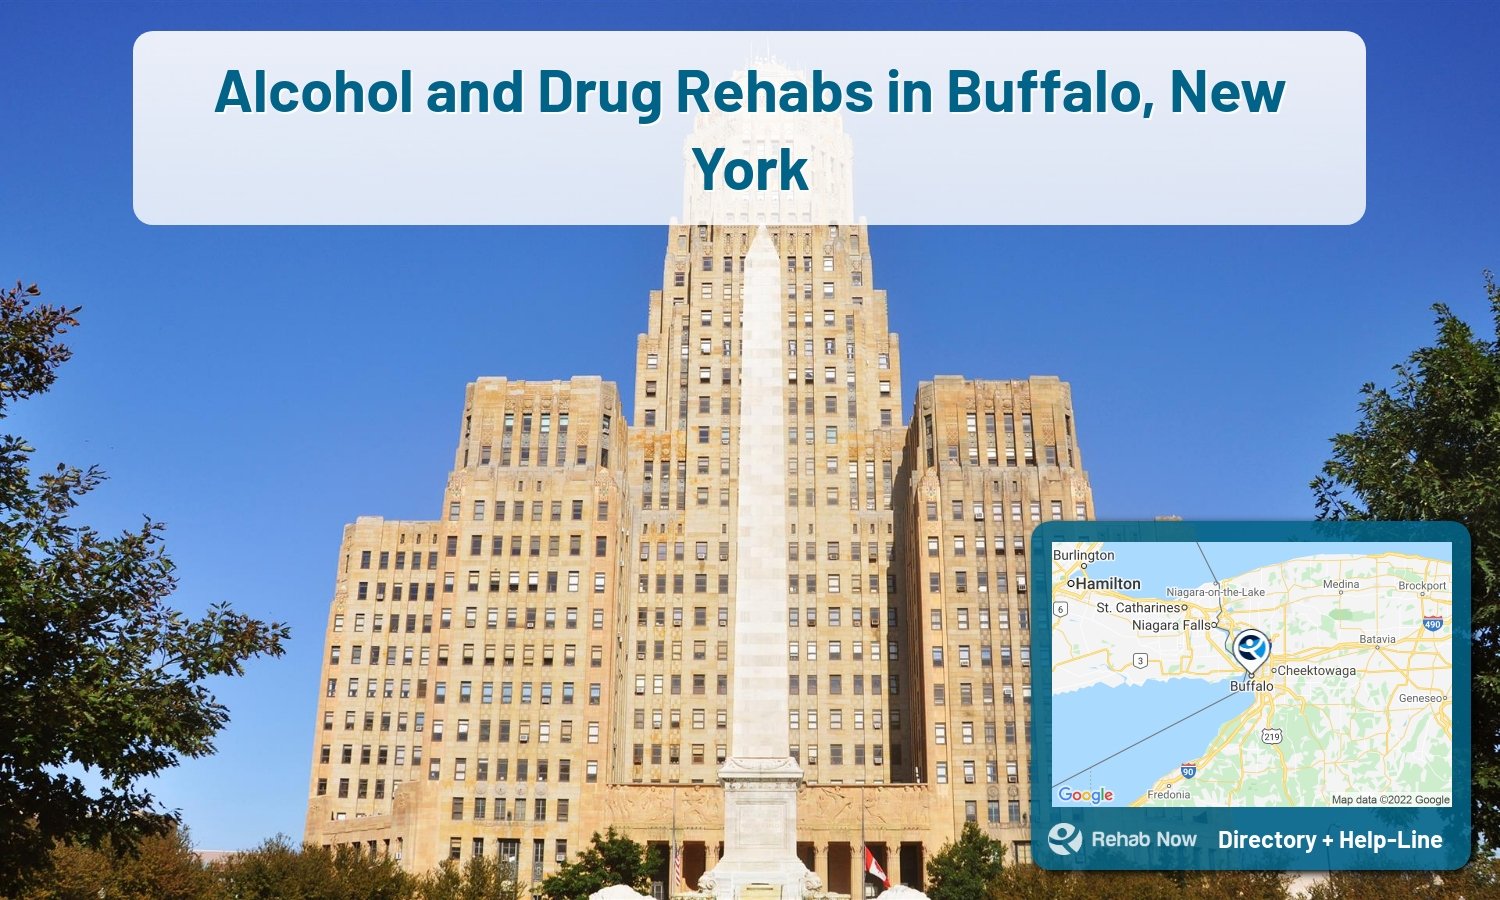 Buffalo, NY Treatment Centers. Find drug rehab in Buffalo, New York, or detox and treatment programs. Get the right help now!